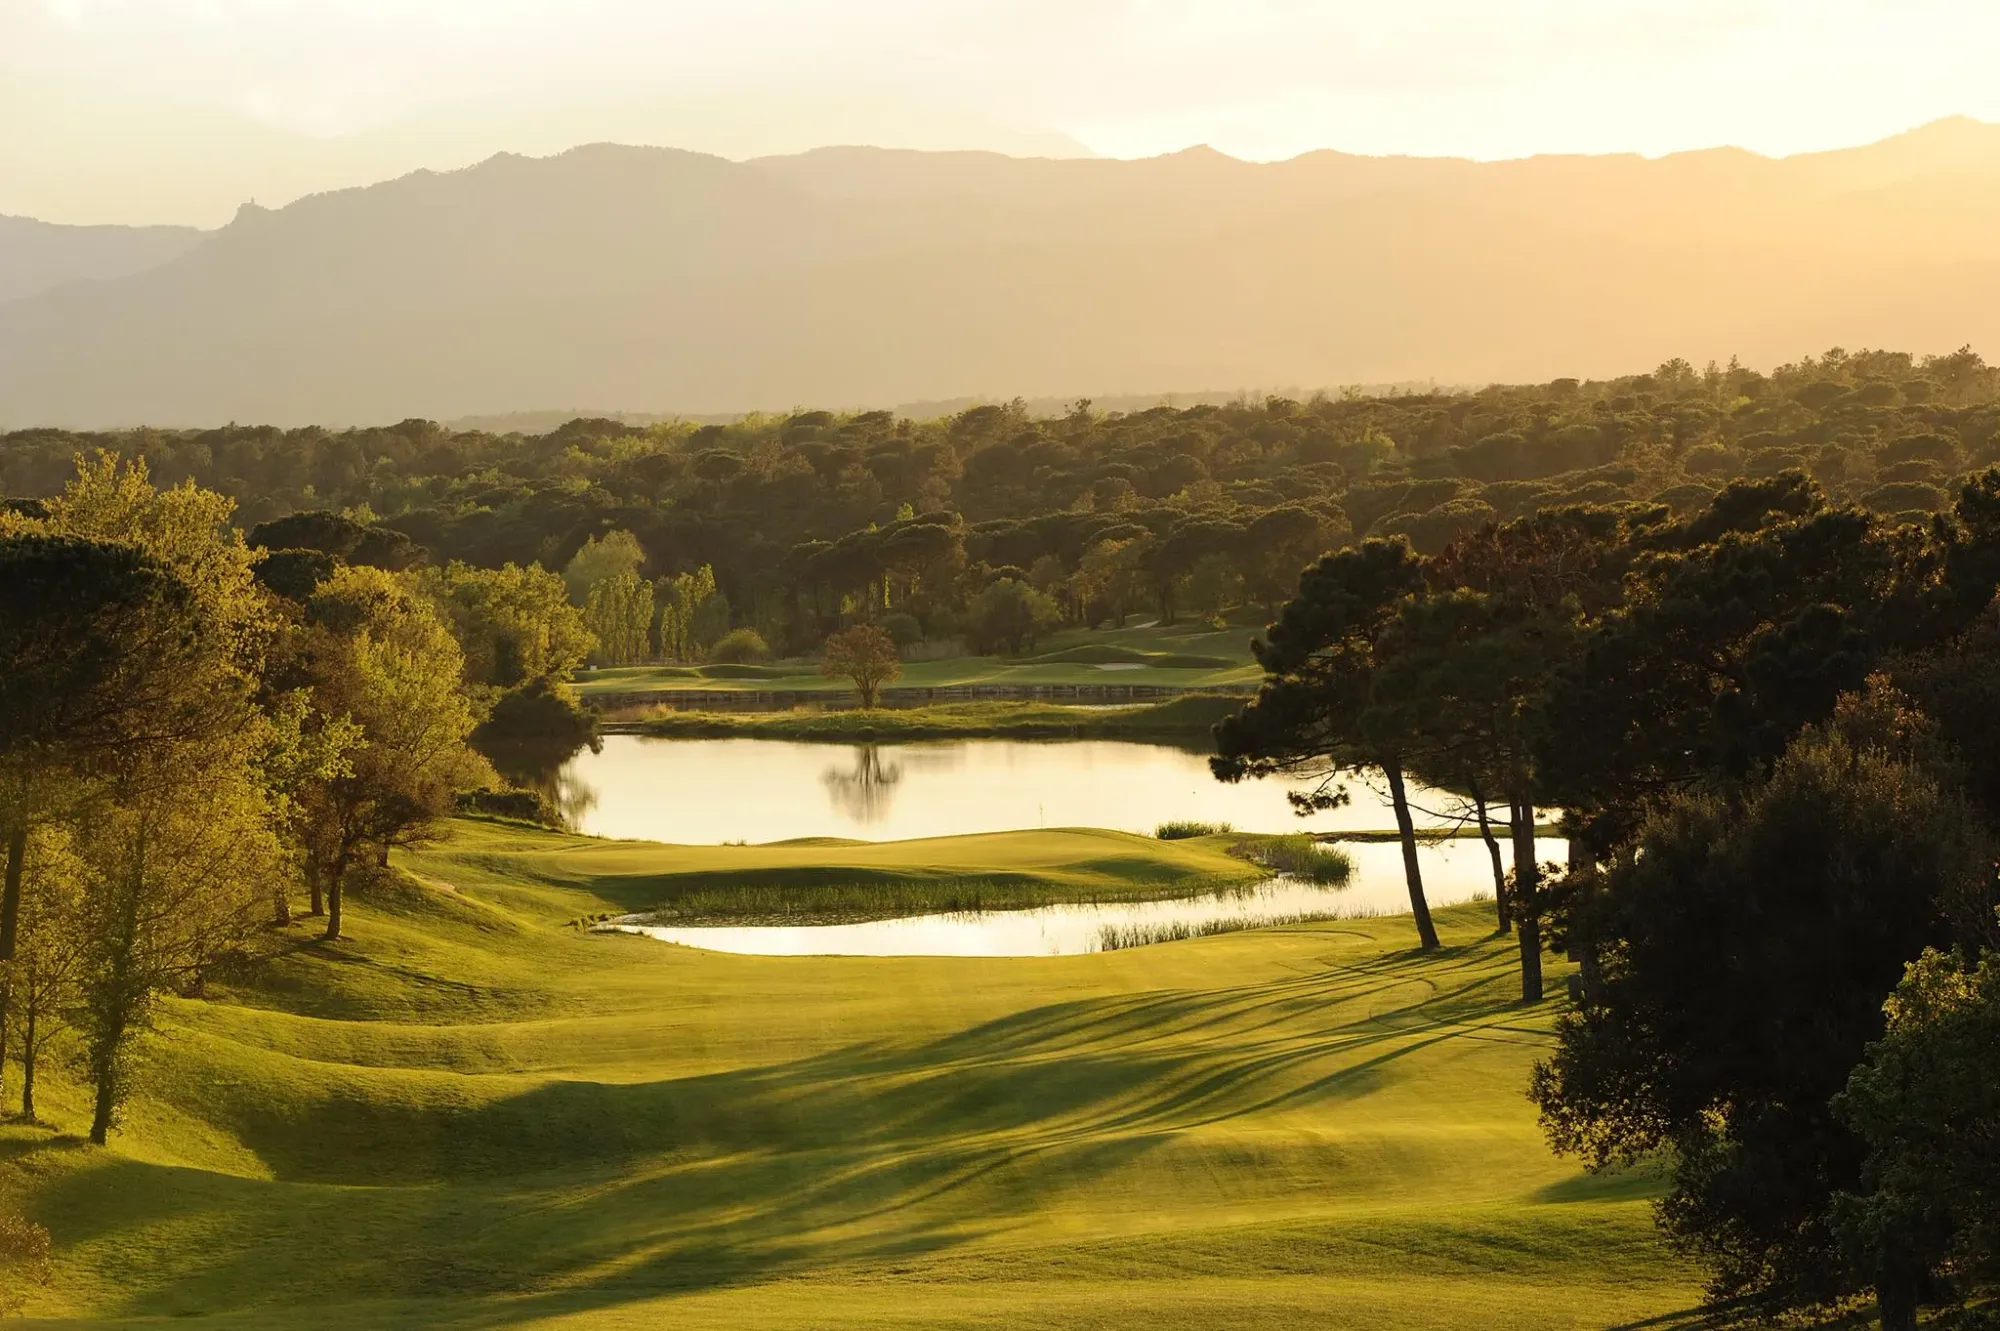 Unforgettable Golfing Getaway in Costa Brava: Experience the Best of Golf with Greenfee365